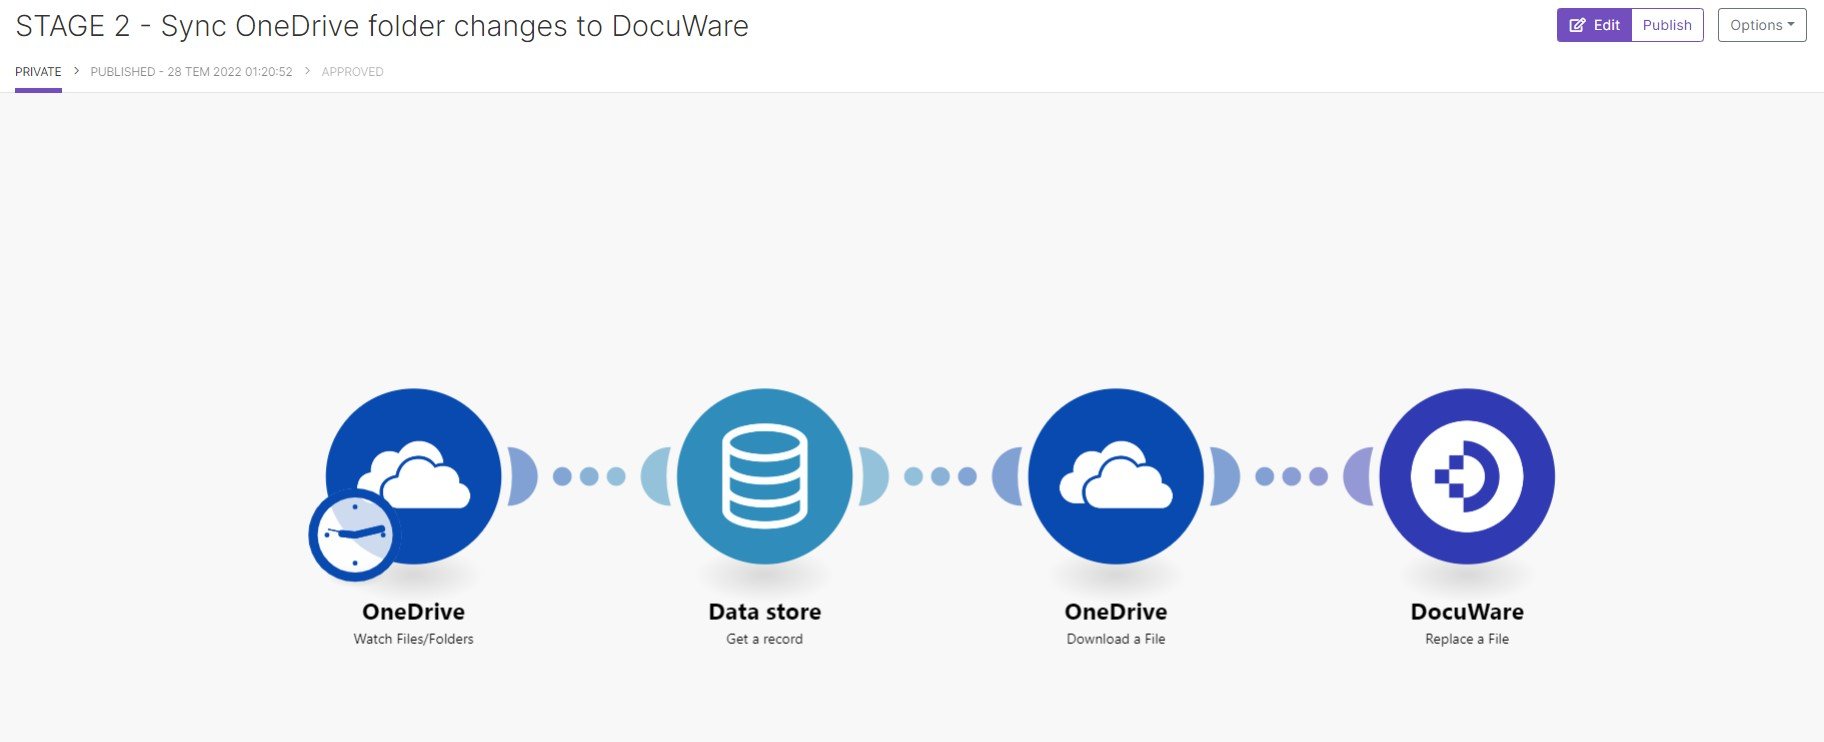 STAGE 2 - Sync OneDrive folder changes to DocuWare